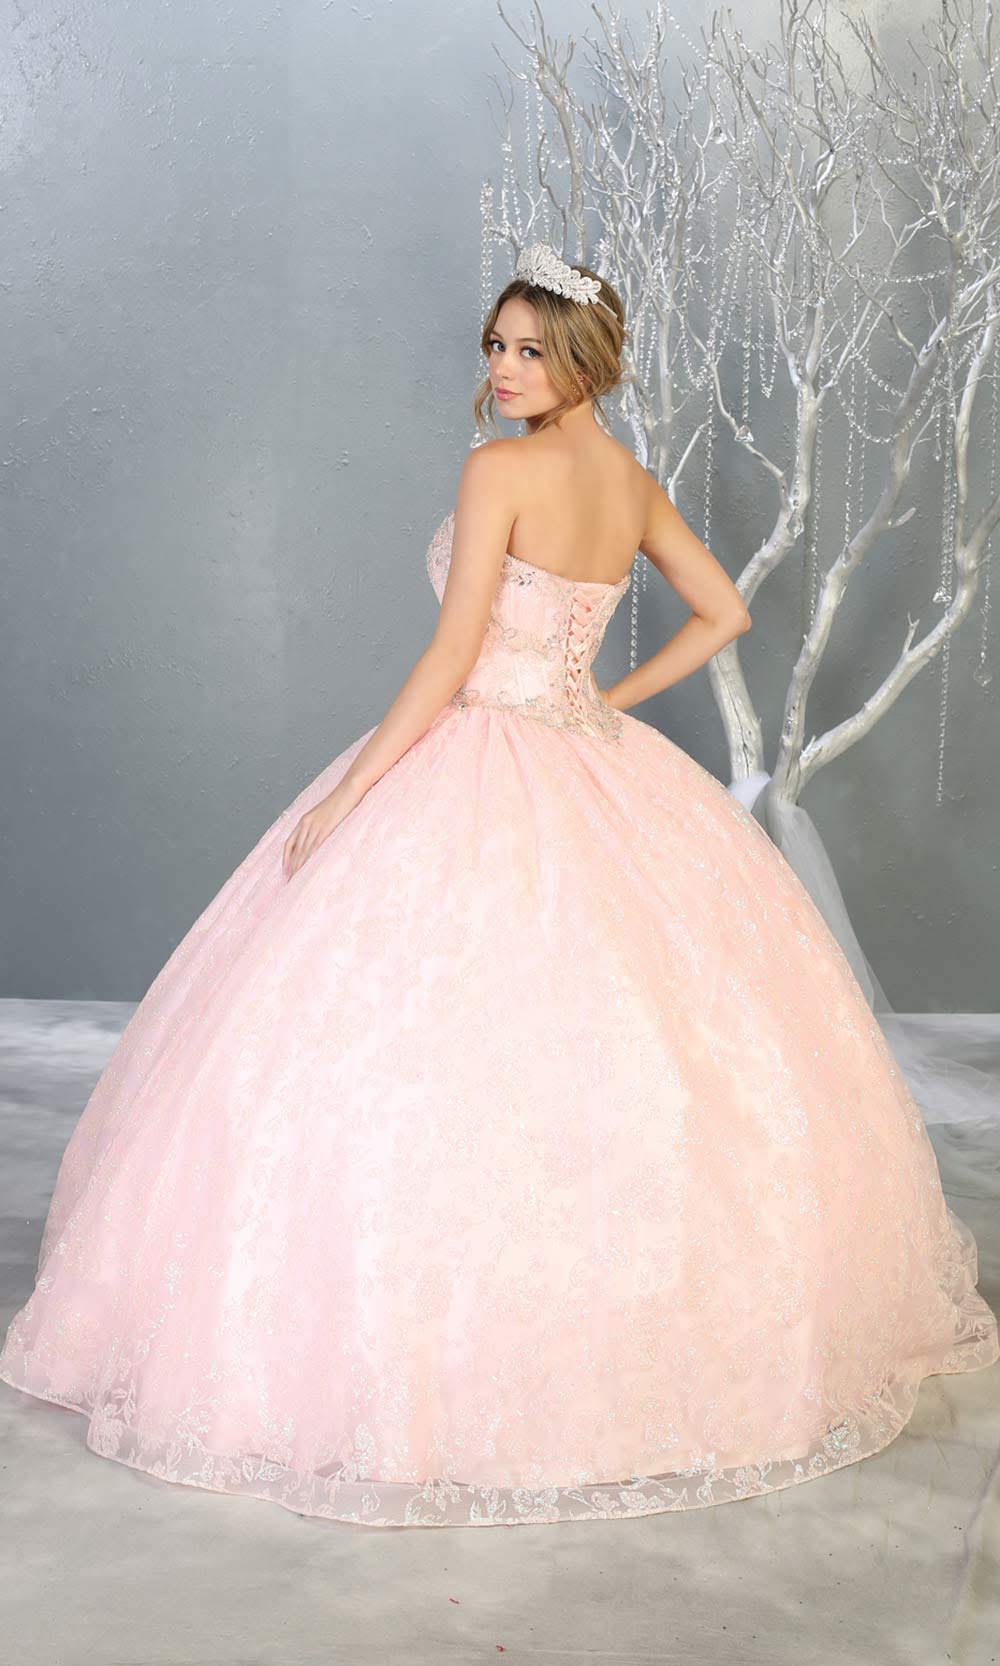 Mayqueen LK144 blush pink quinceanera ball gown w/lace detail and beaded top. This light pink ball gown is perfect for engagement dress, wedding reception, indowestern party gown, sweet 16, debut,sweet 15, sweet 18.Plus sizes available for ballgowns-b